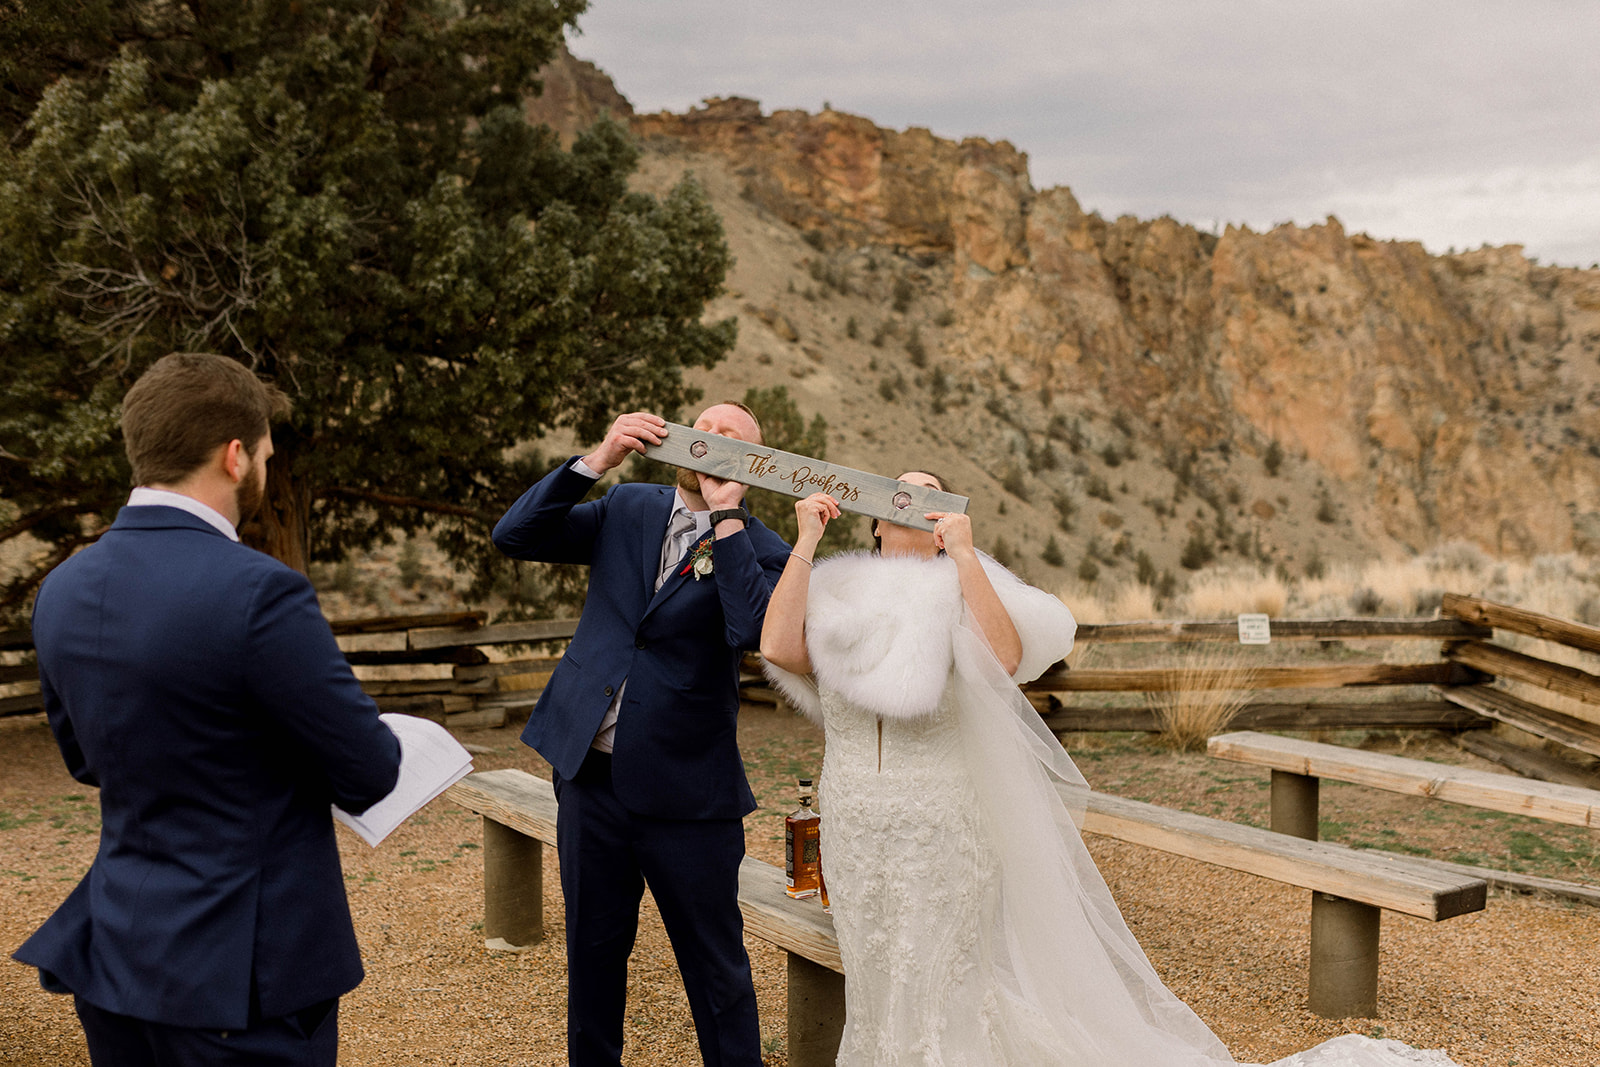 couple in a mountain setting doing a shot-ski shot during their wedding ceremony